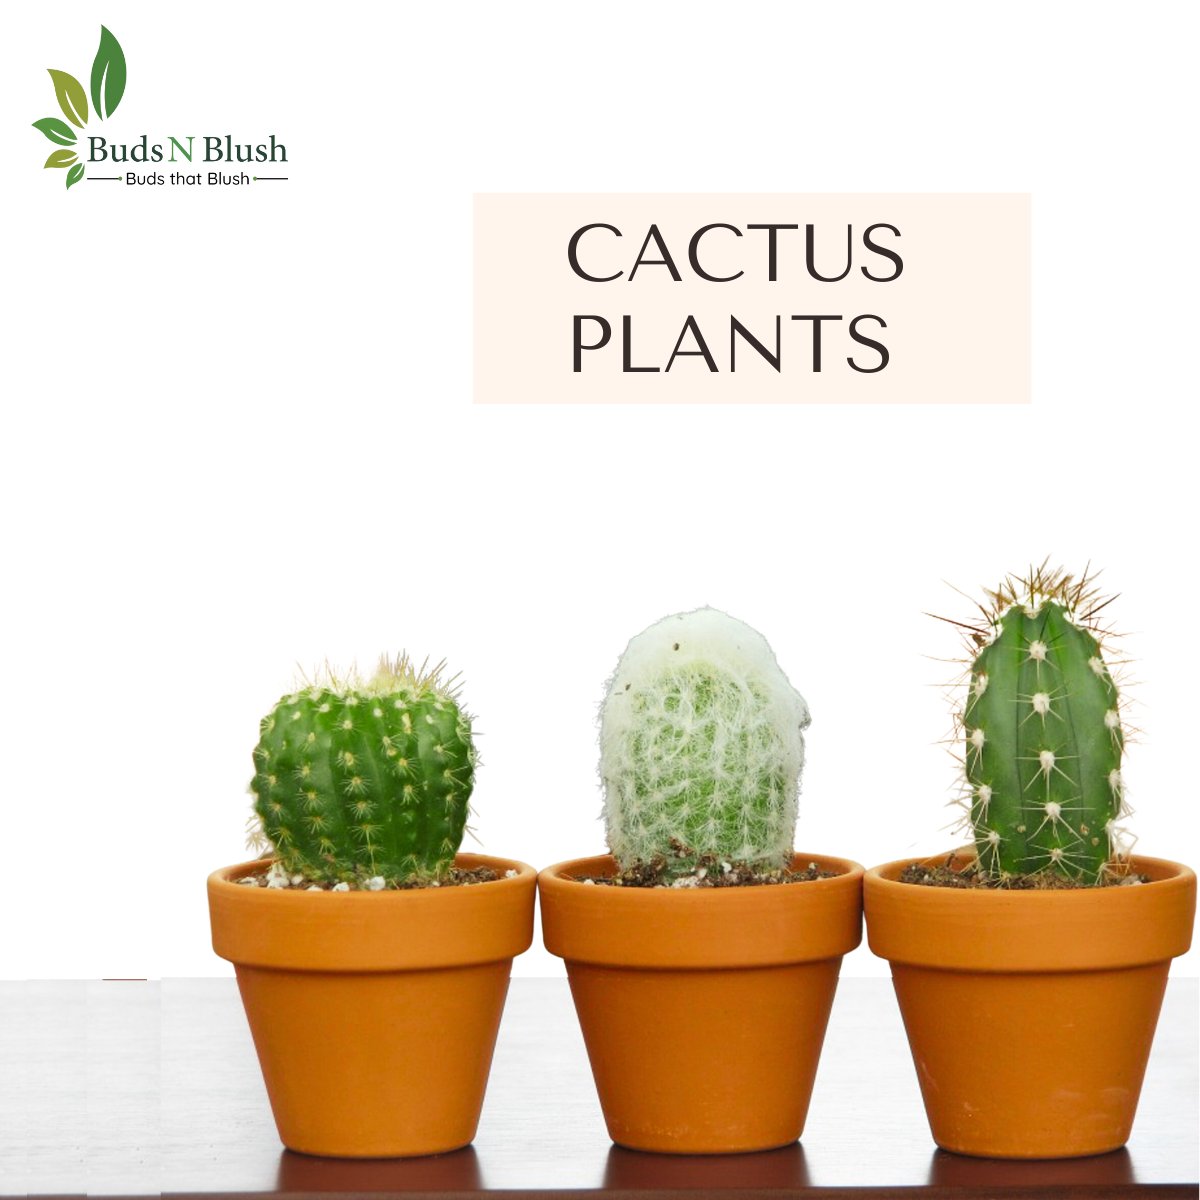 Budsnblush proudly present largest collection of some unique cactus plants in India at most affordable rate